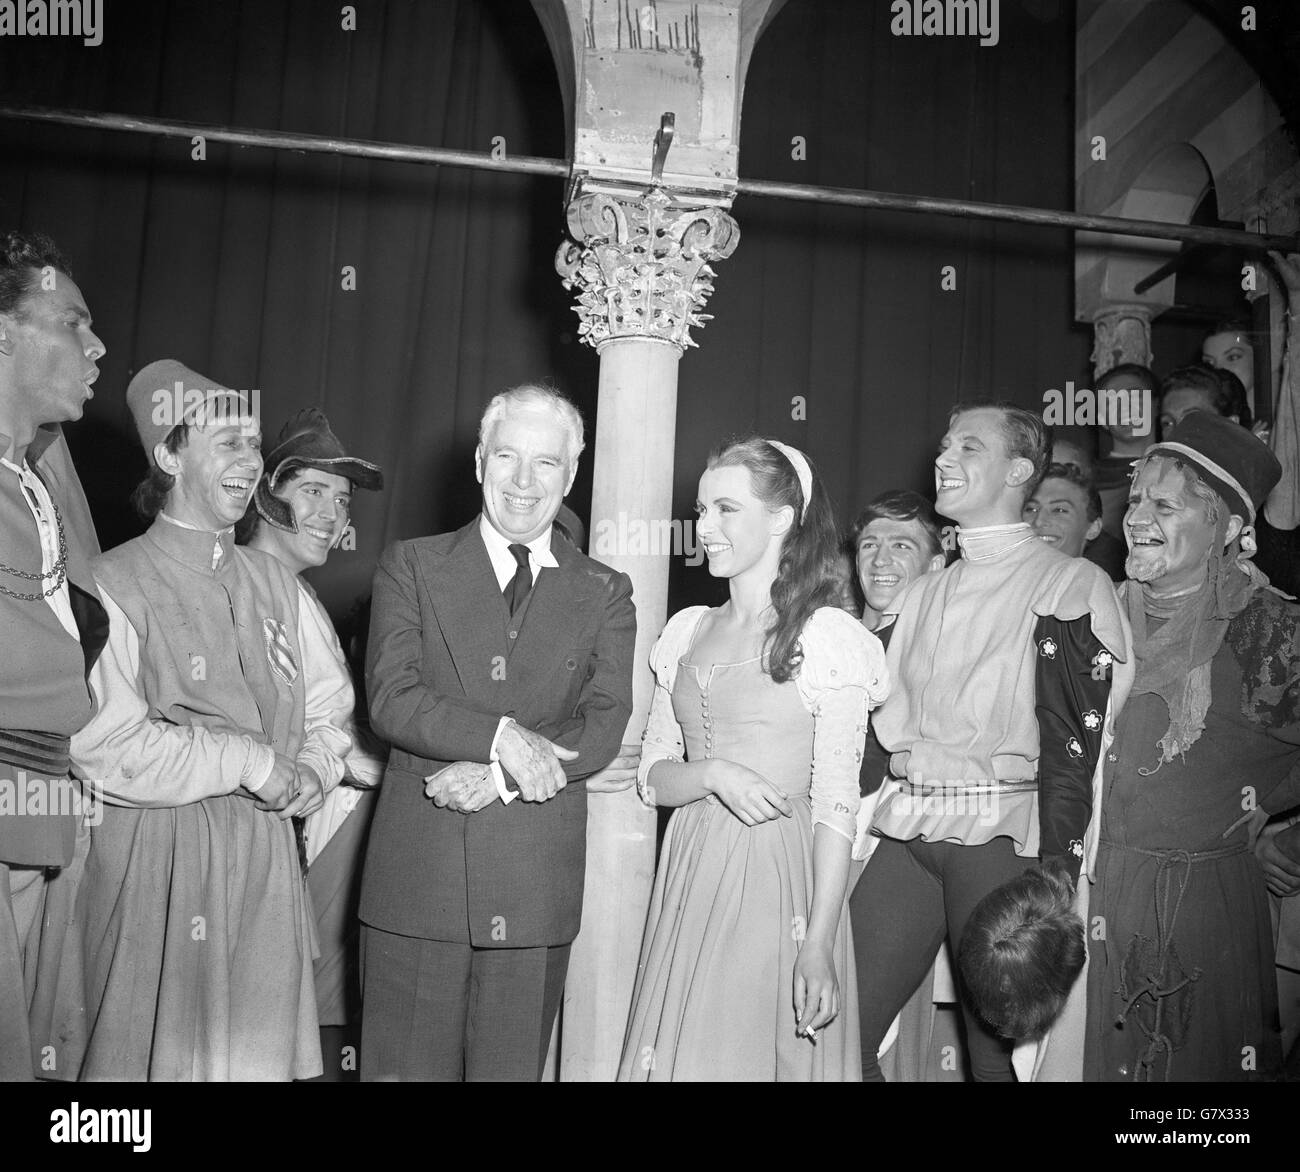 Pictured at London's Old Vic Theatre with members of the cast of 'Romeo and Juliet', is Charlie Chaplin, paying his second visit to the theatre in 50 years. With him is Claire Bloom, his leading lady in 'Limelight', who plays Juliet. On her left is Alan Badel as Romeo. Stock Photo